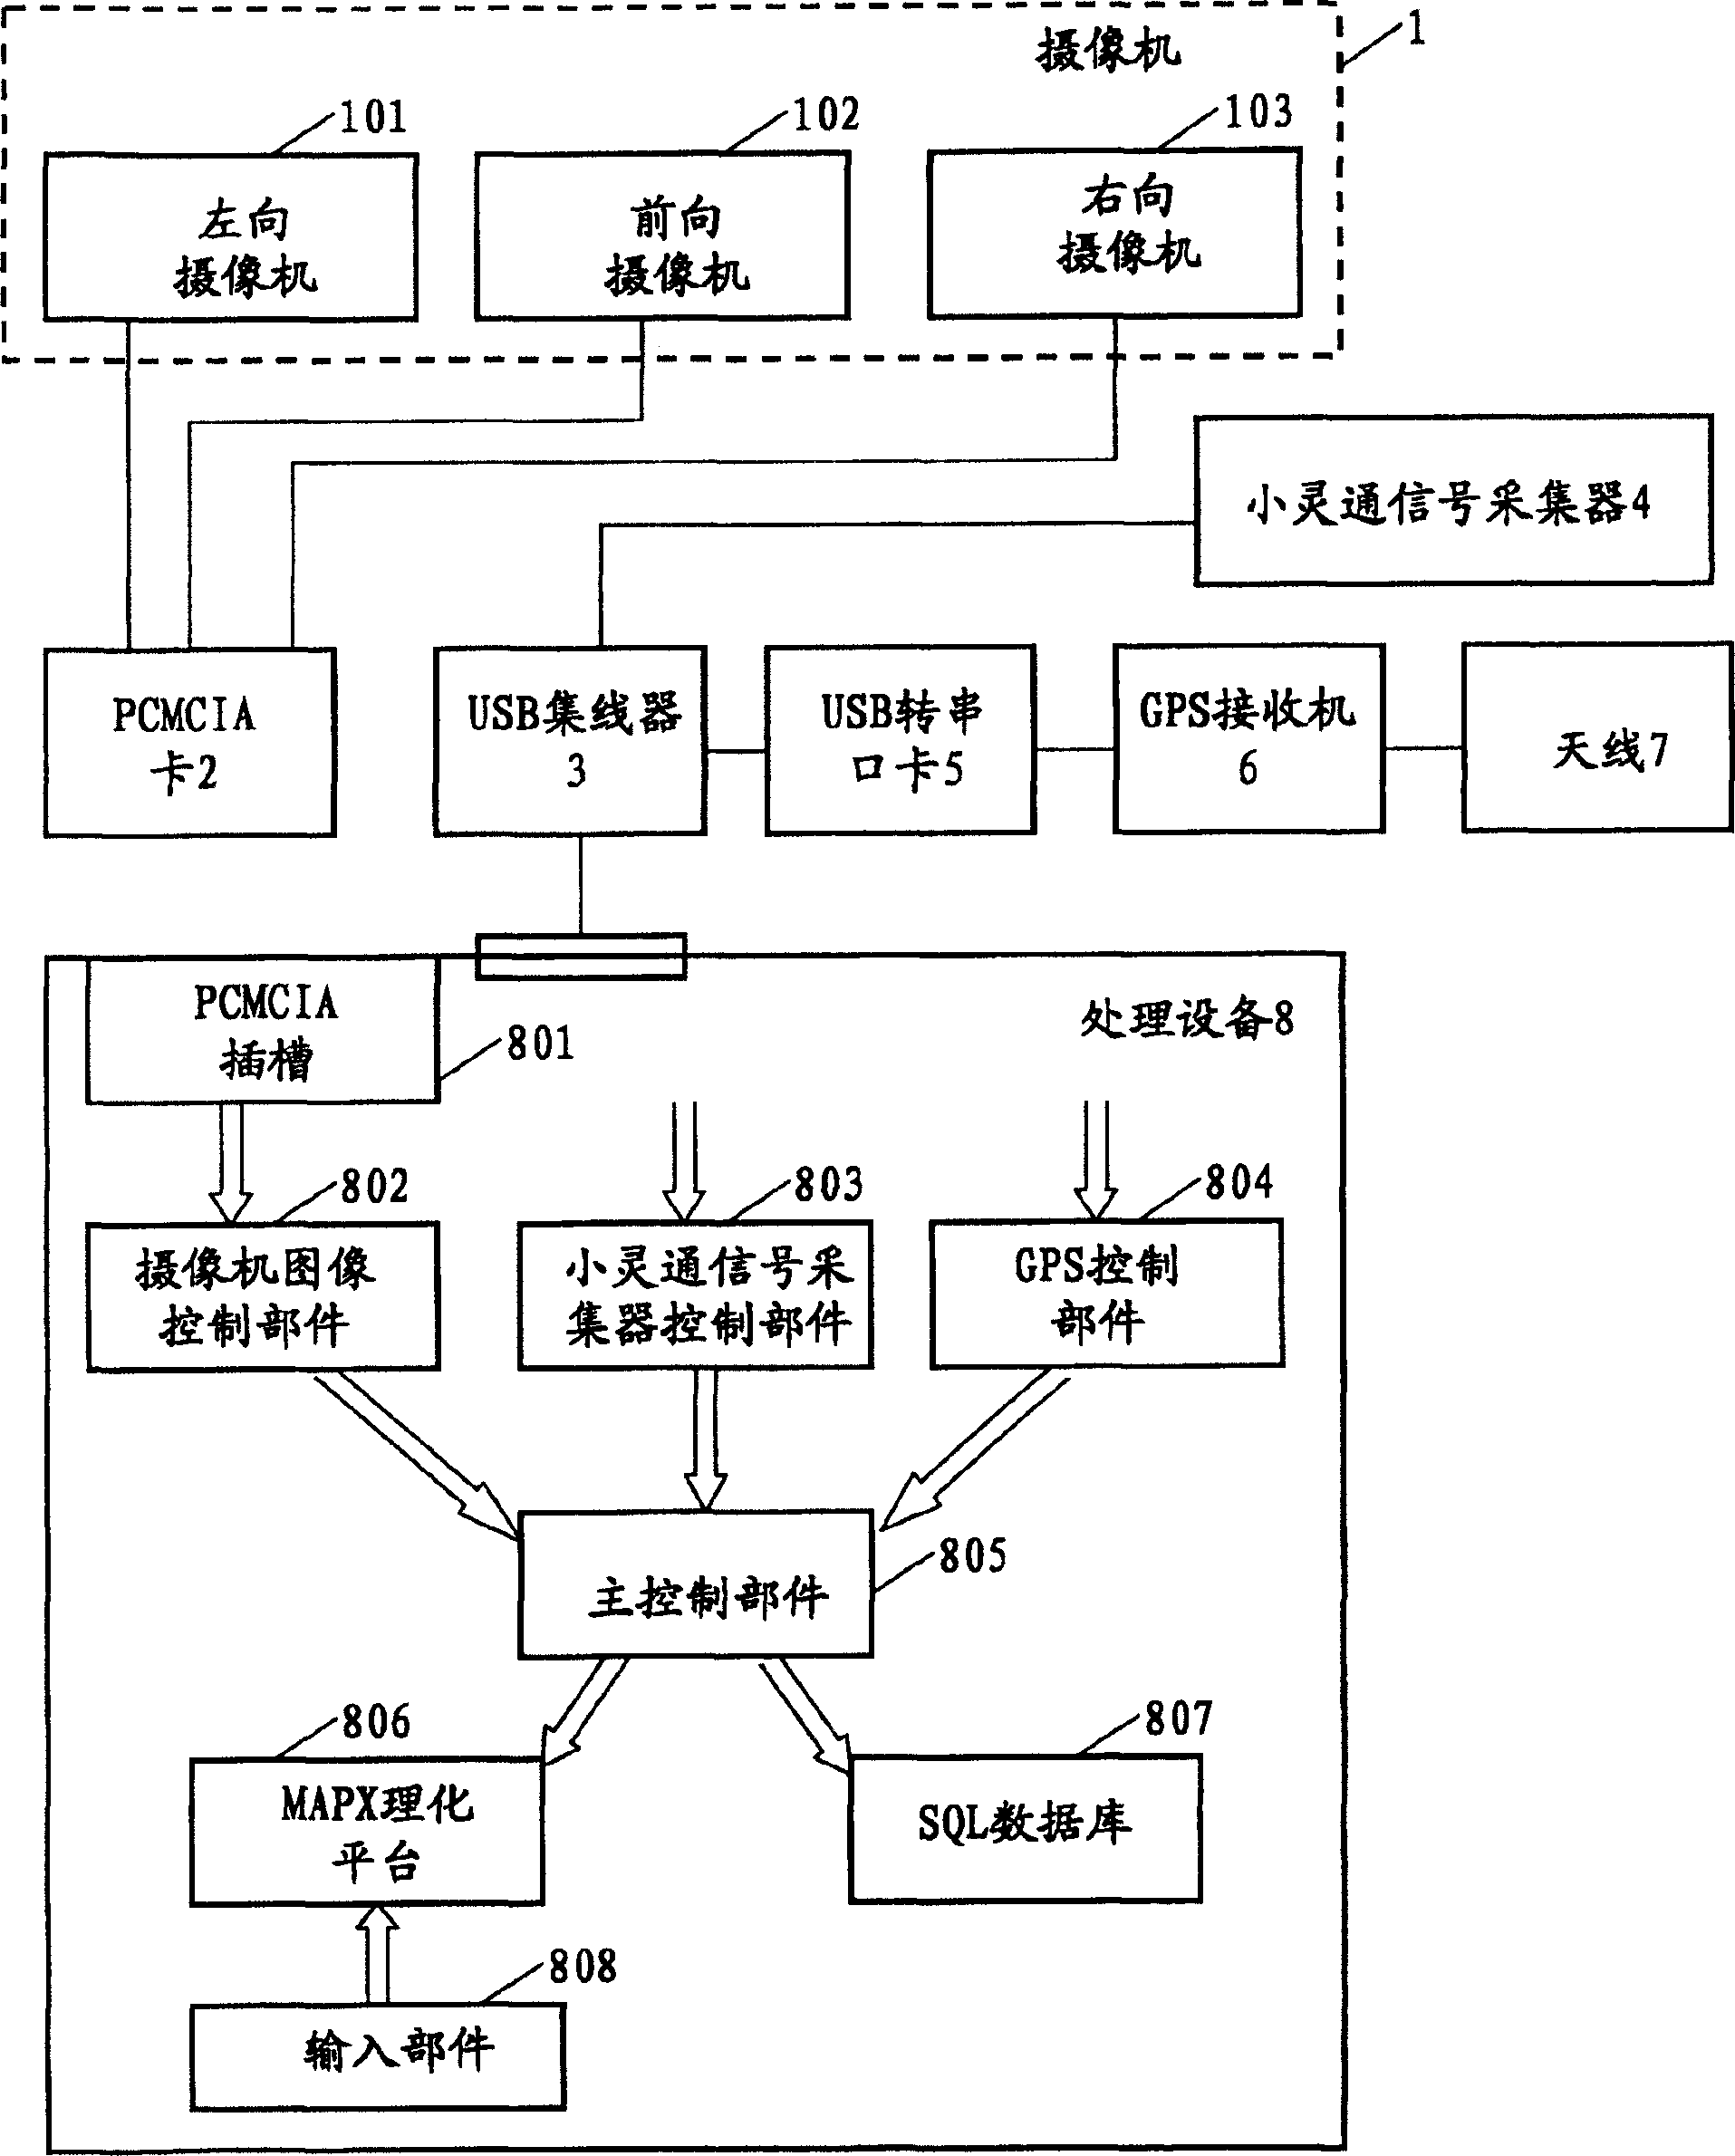 Smart phone network data collecting and analyzing system and method capable of collecting real scence